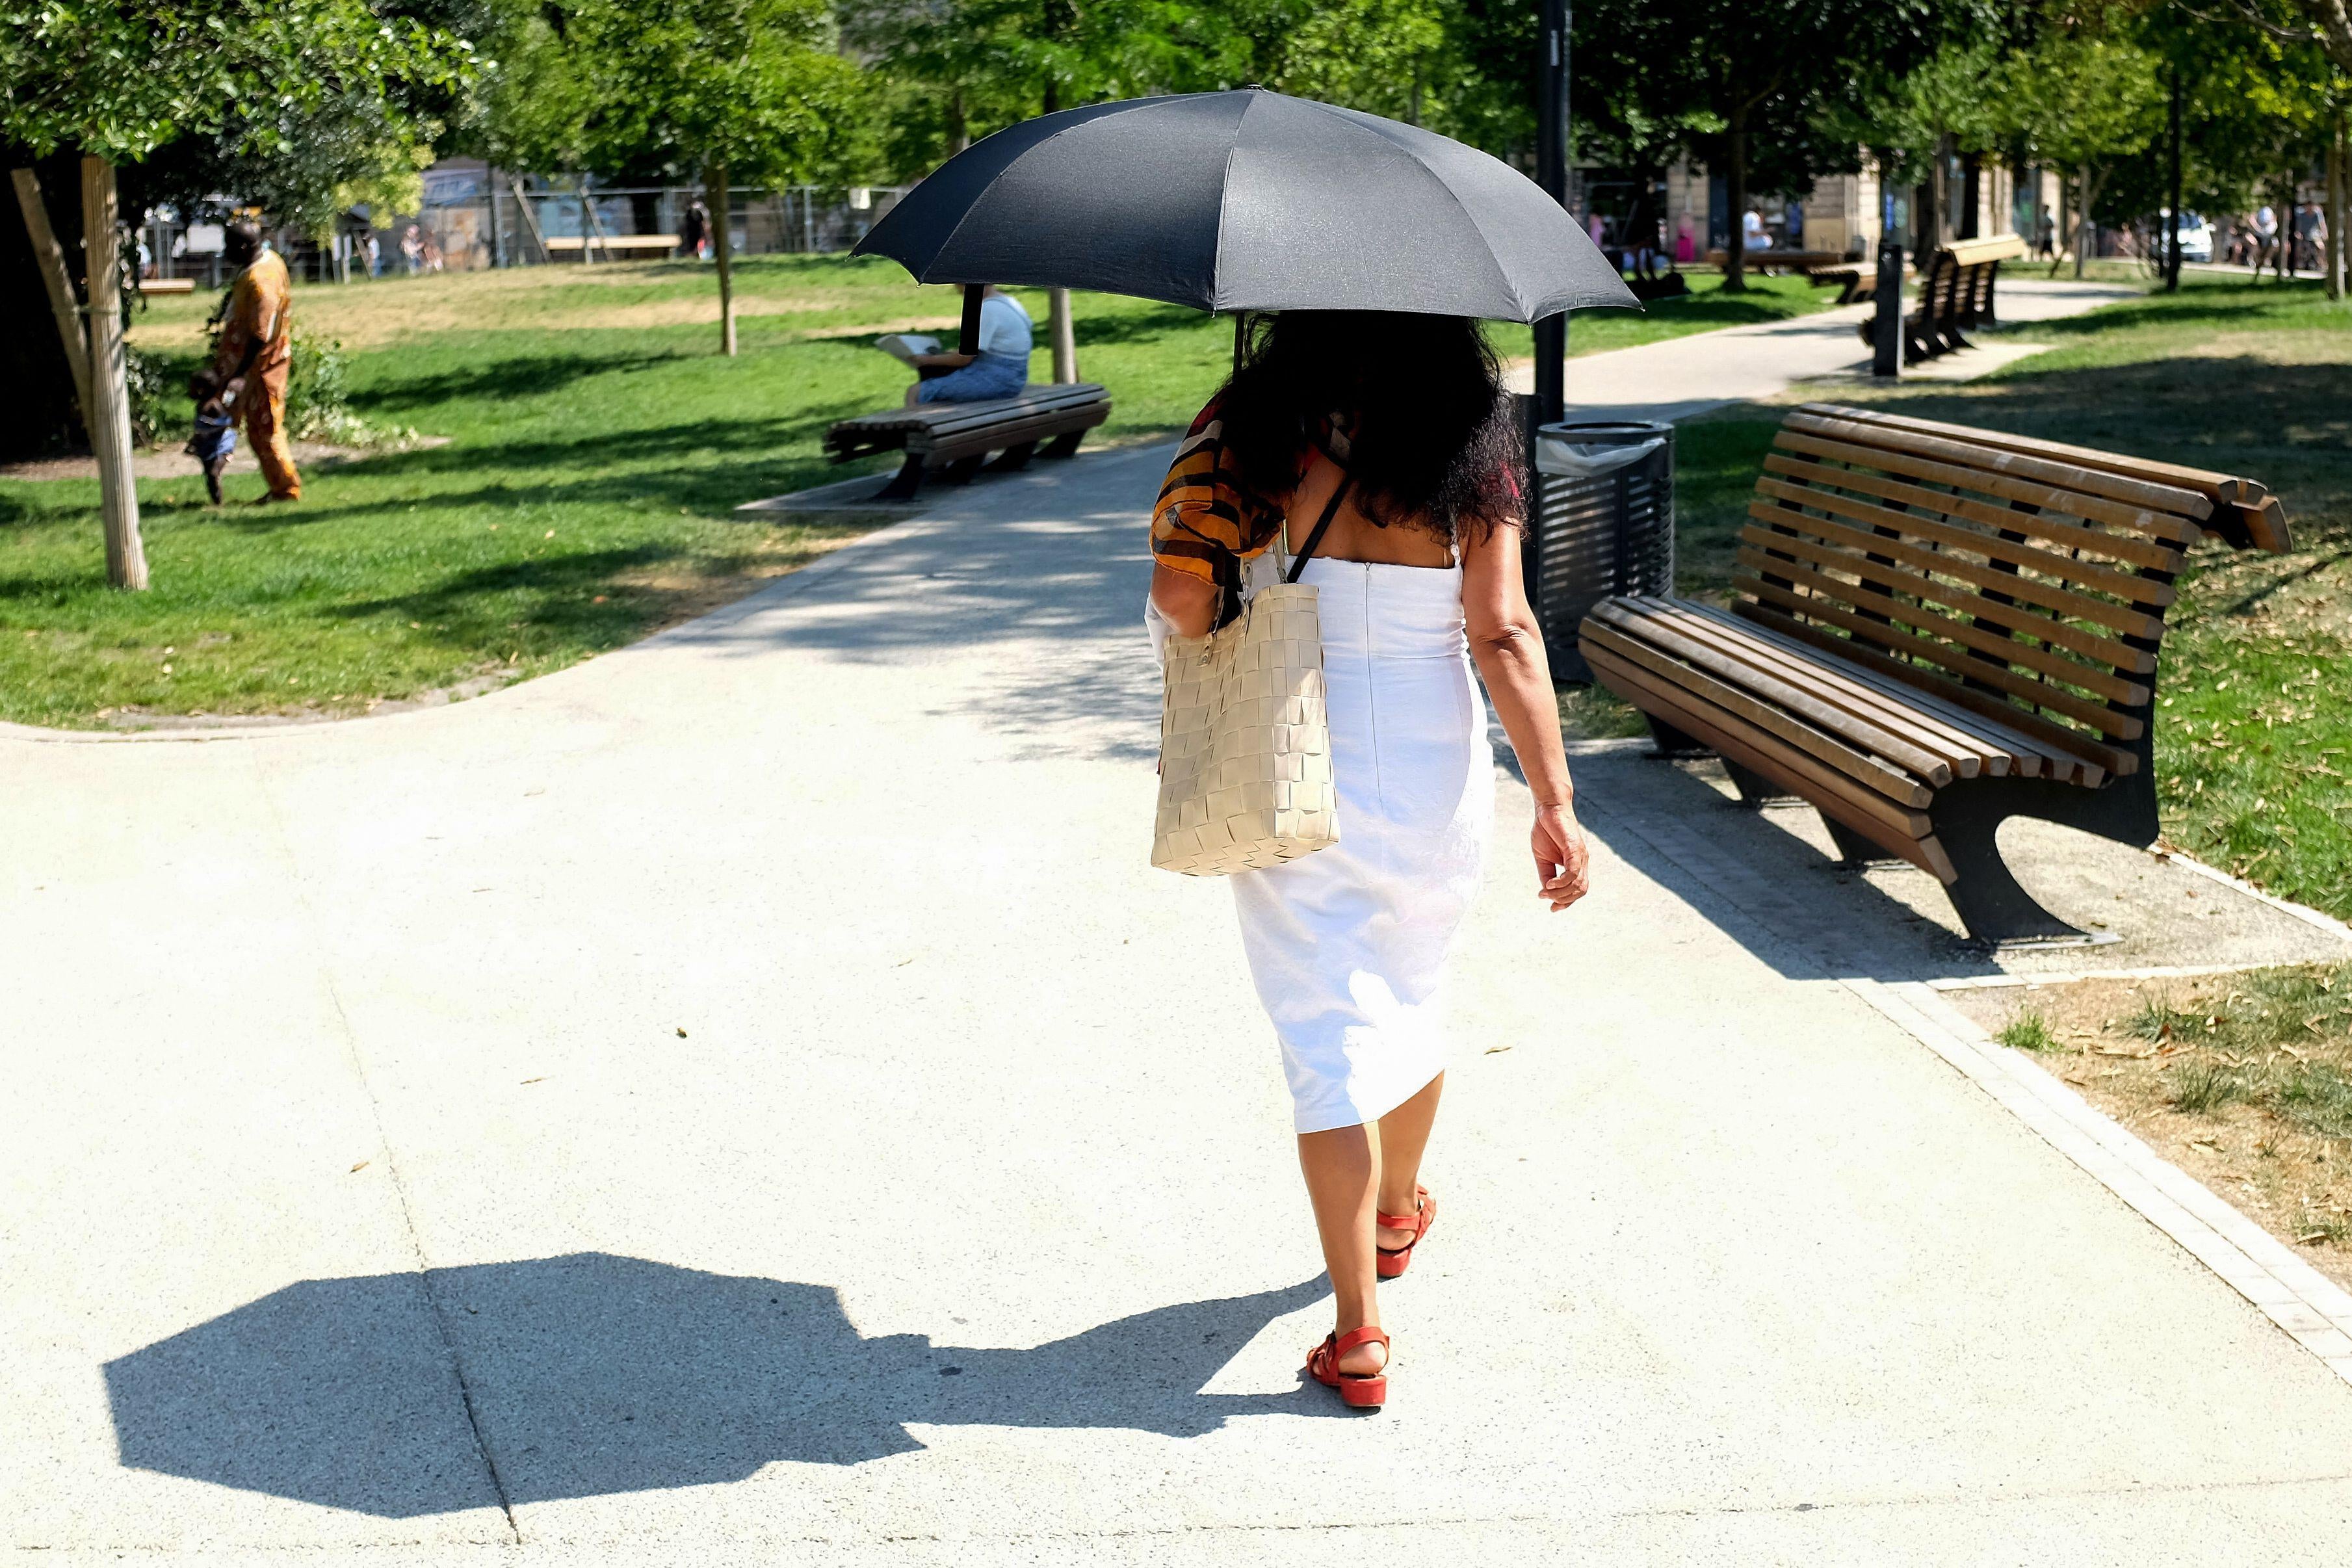 A woman walks in a park wearing a white dress and holding a black umbrella that casts a shadow on the sidewalk.